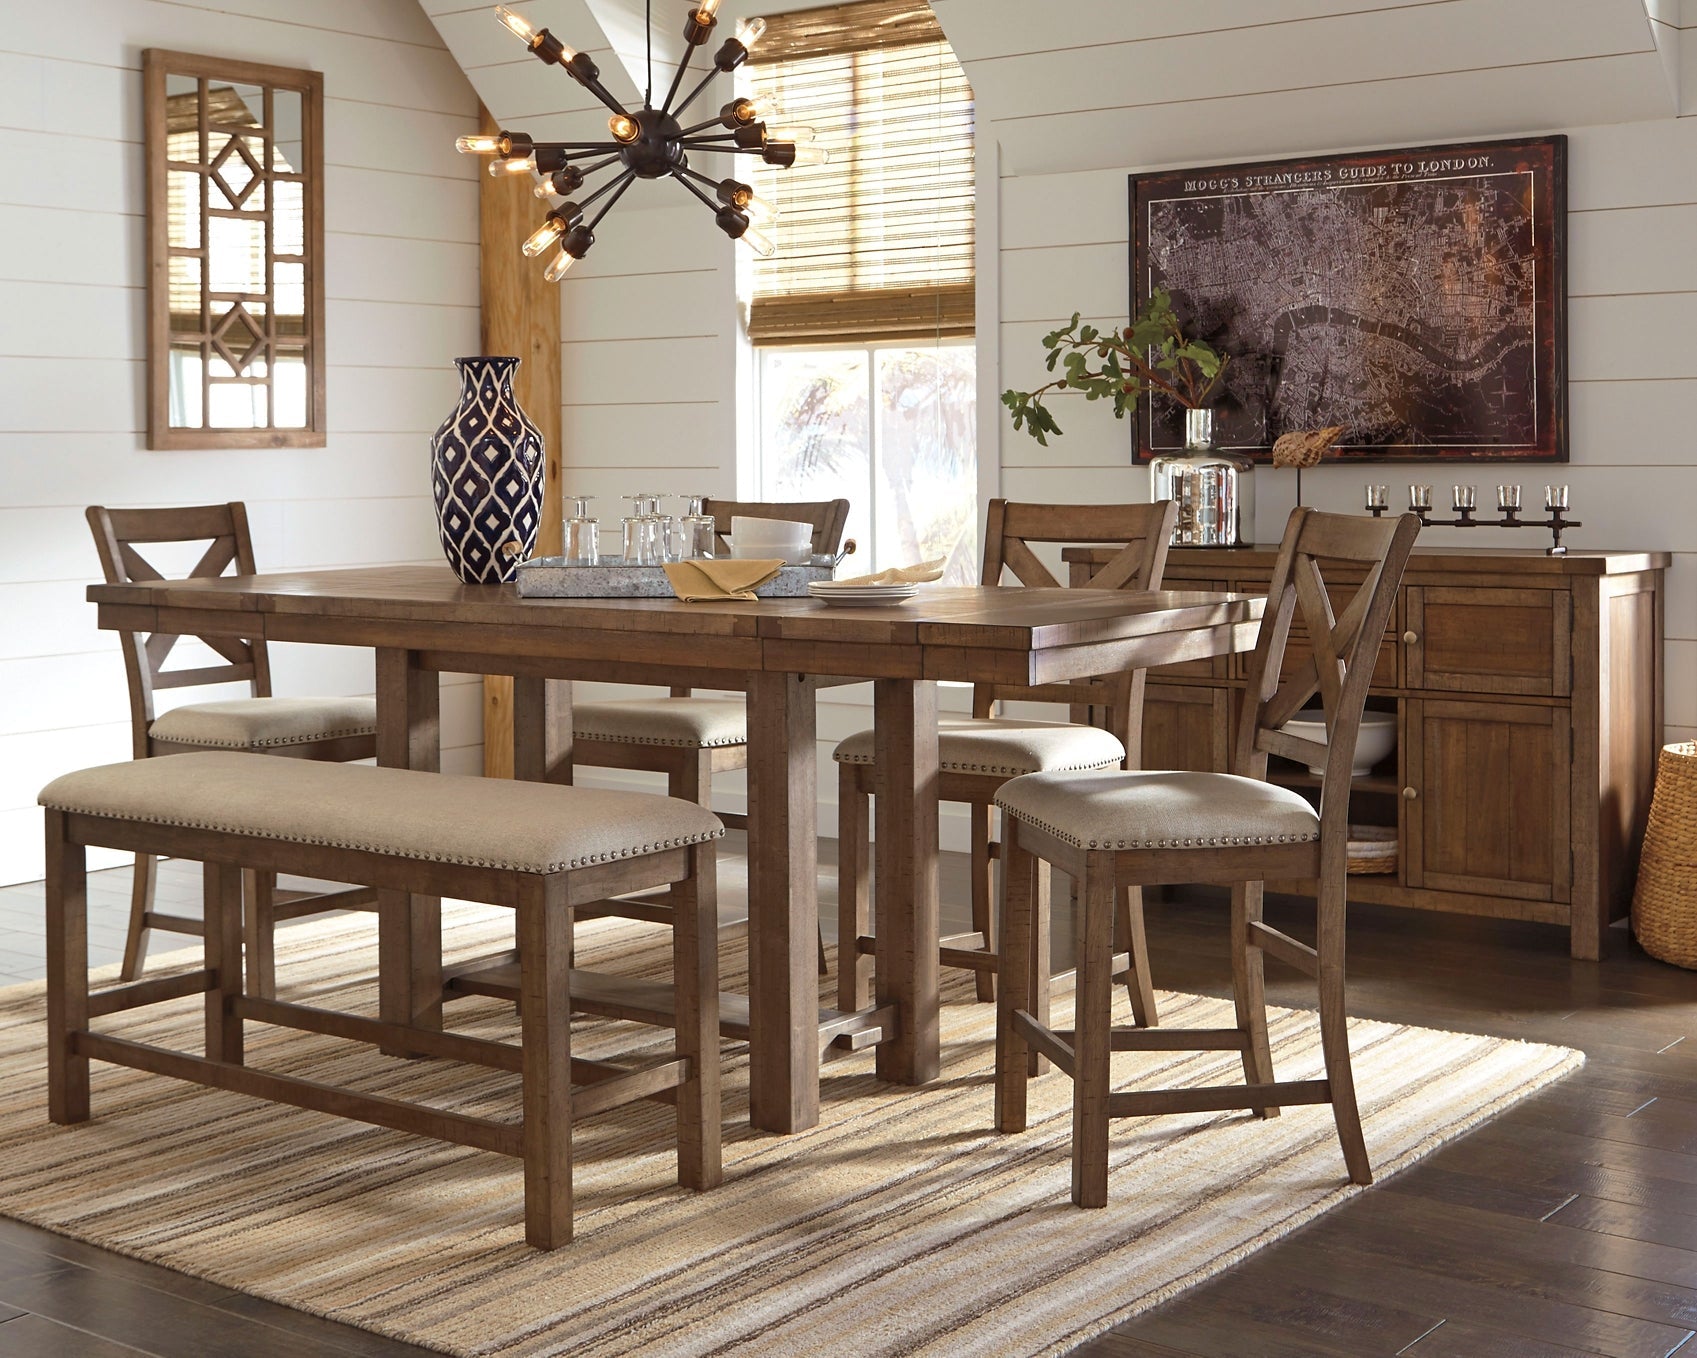 Moriville Counter Height Dining Table and 4 Barstools and Bench with Storage at Walker Mattress and Furniture Locations in Cedar Park and Belton TX.